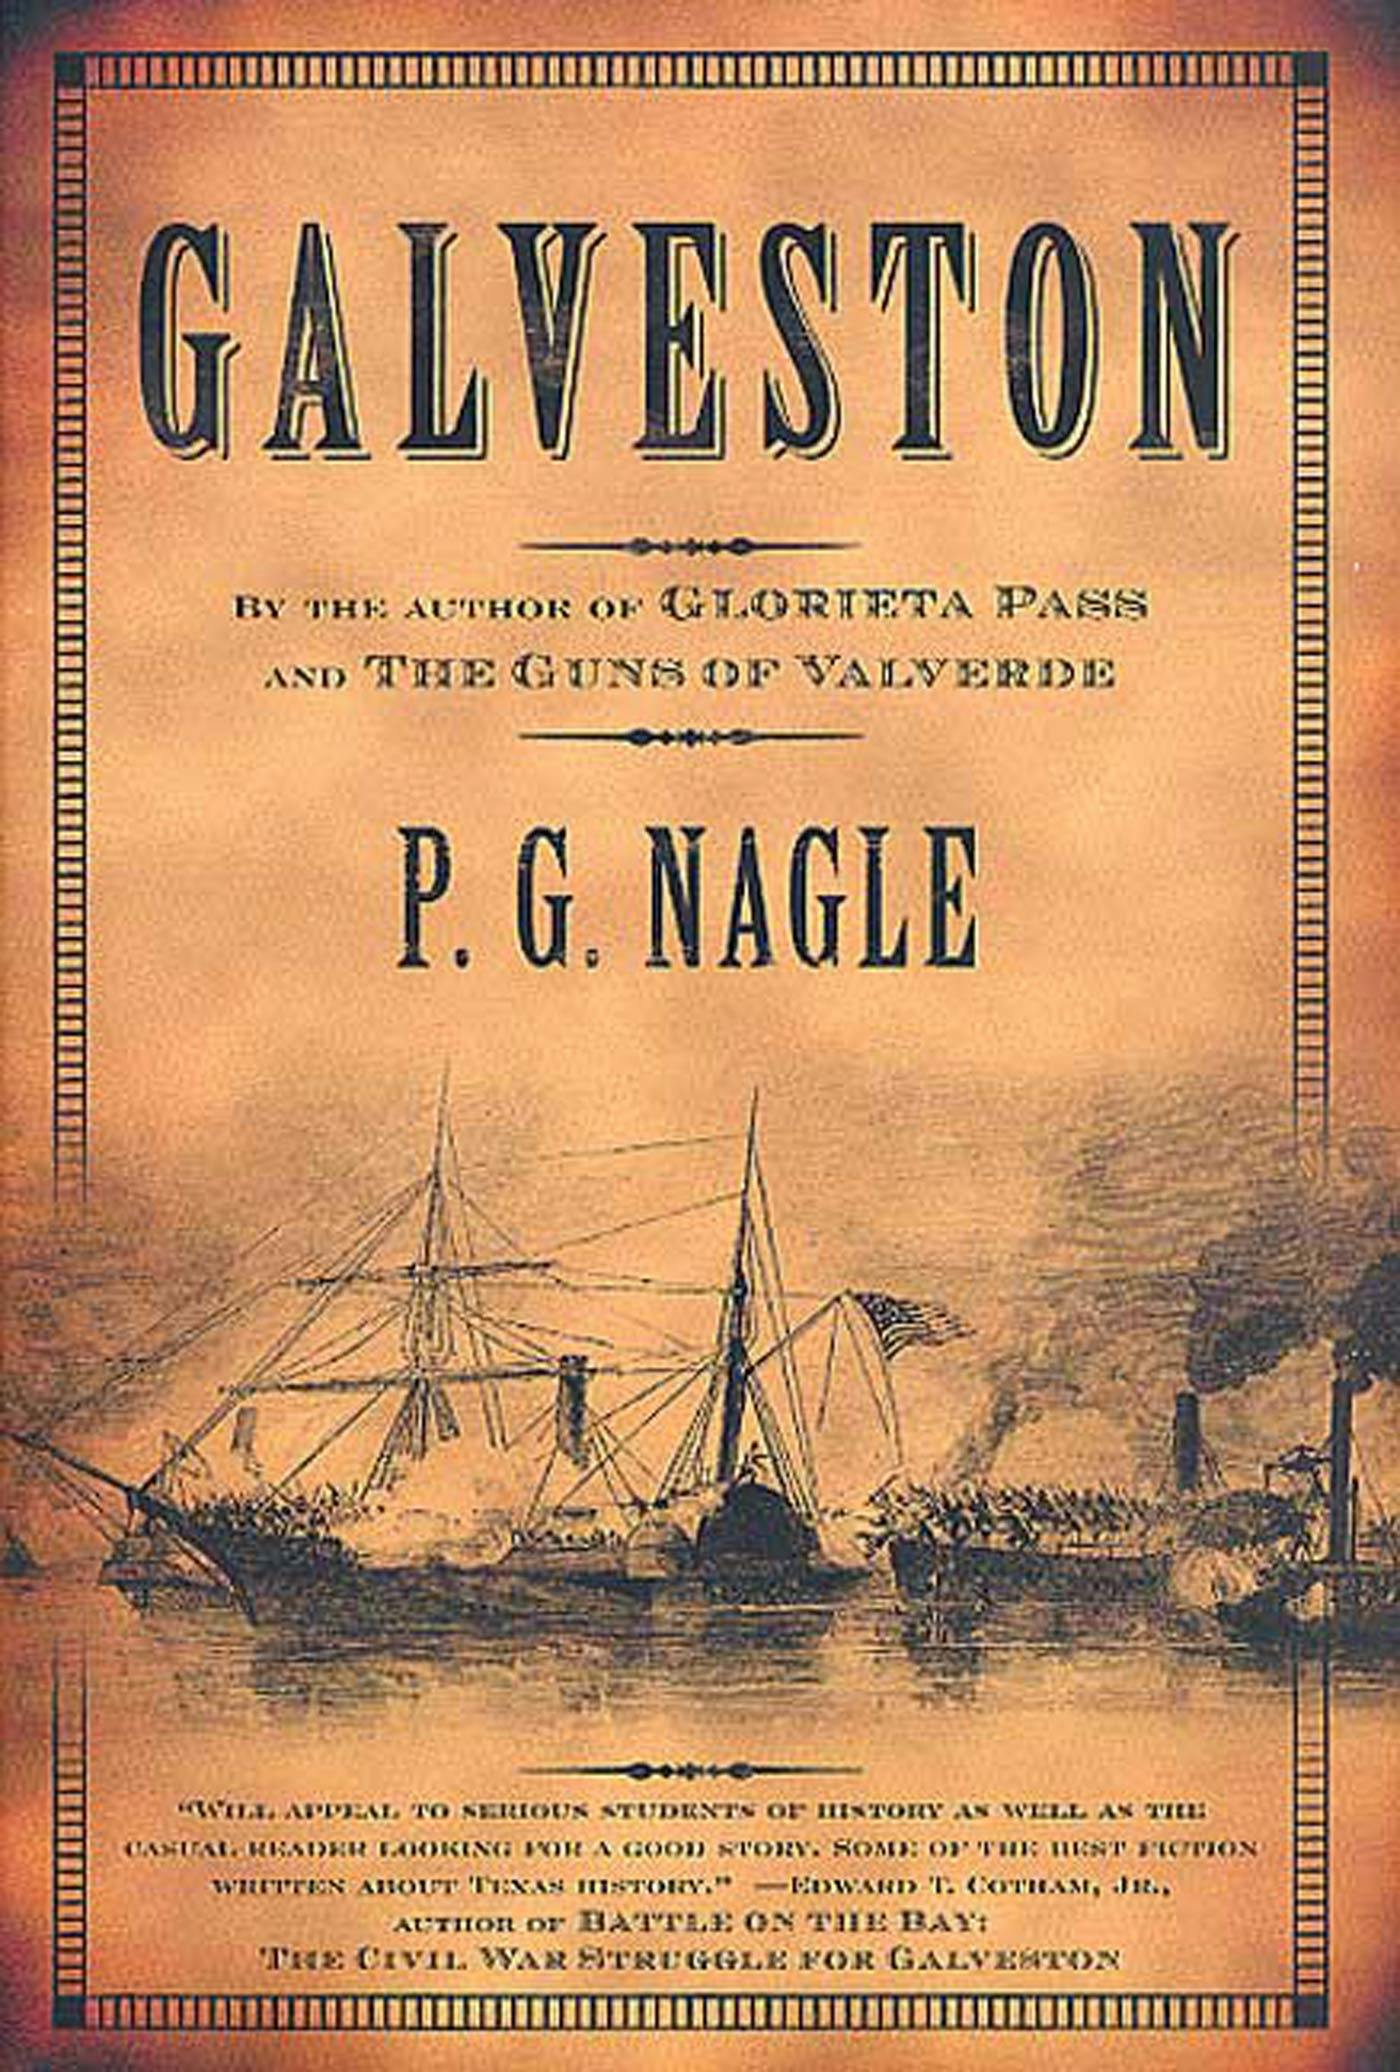 Cover for the book titled as: Galveston